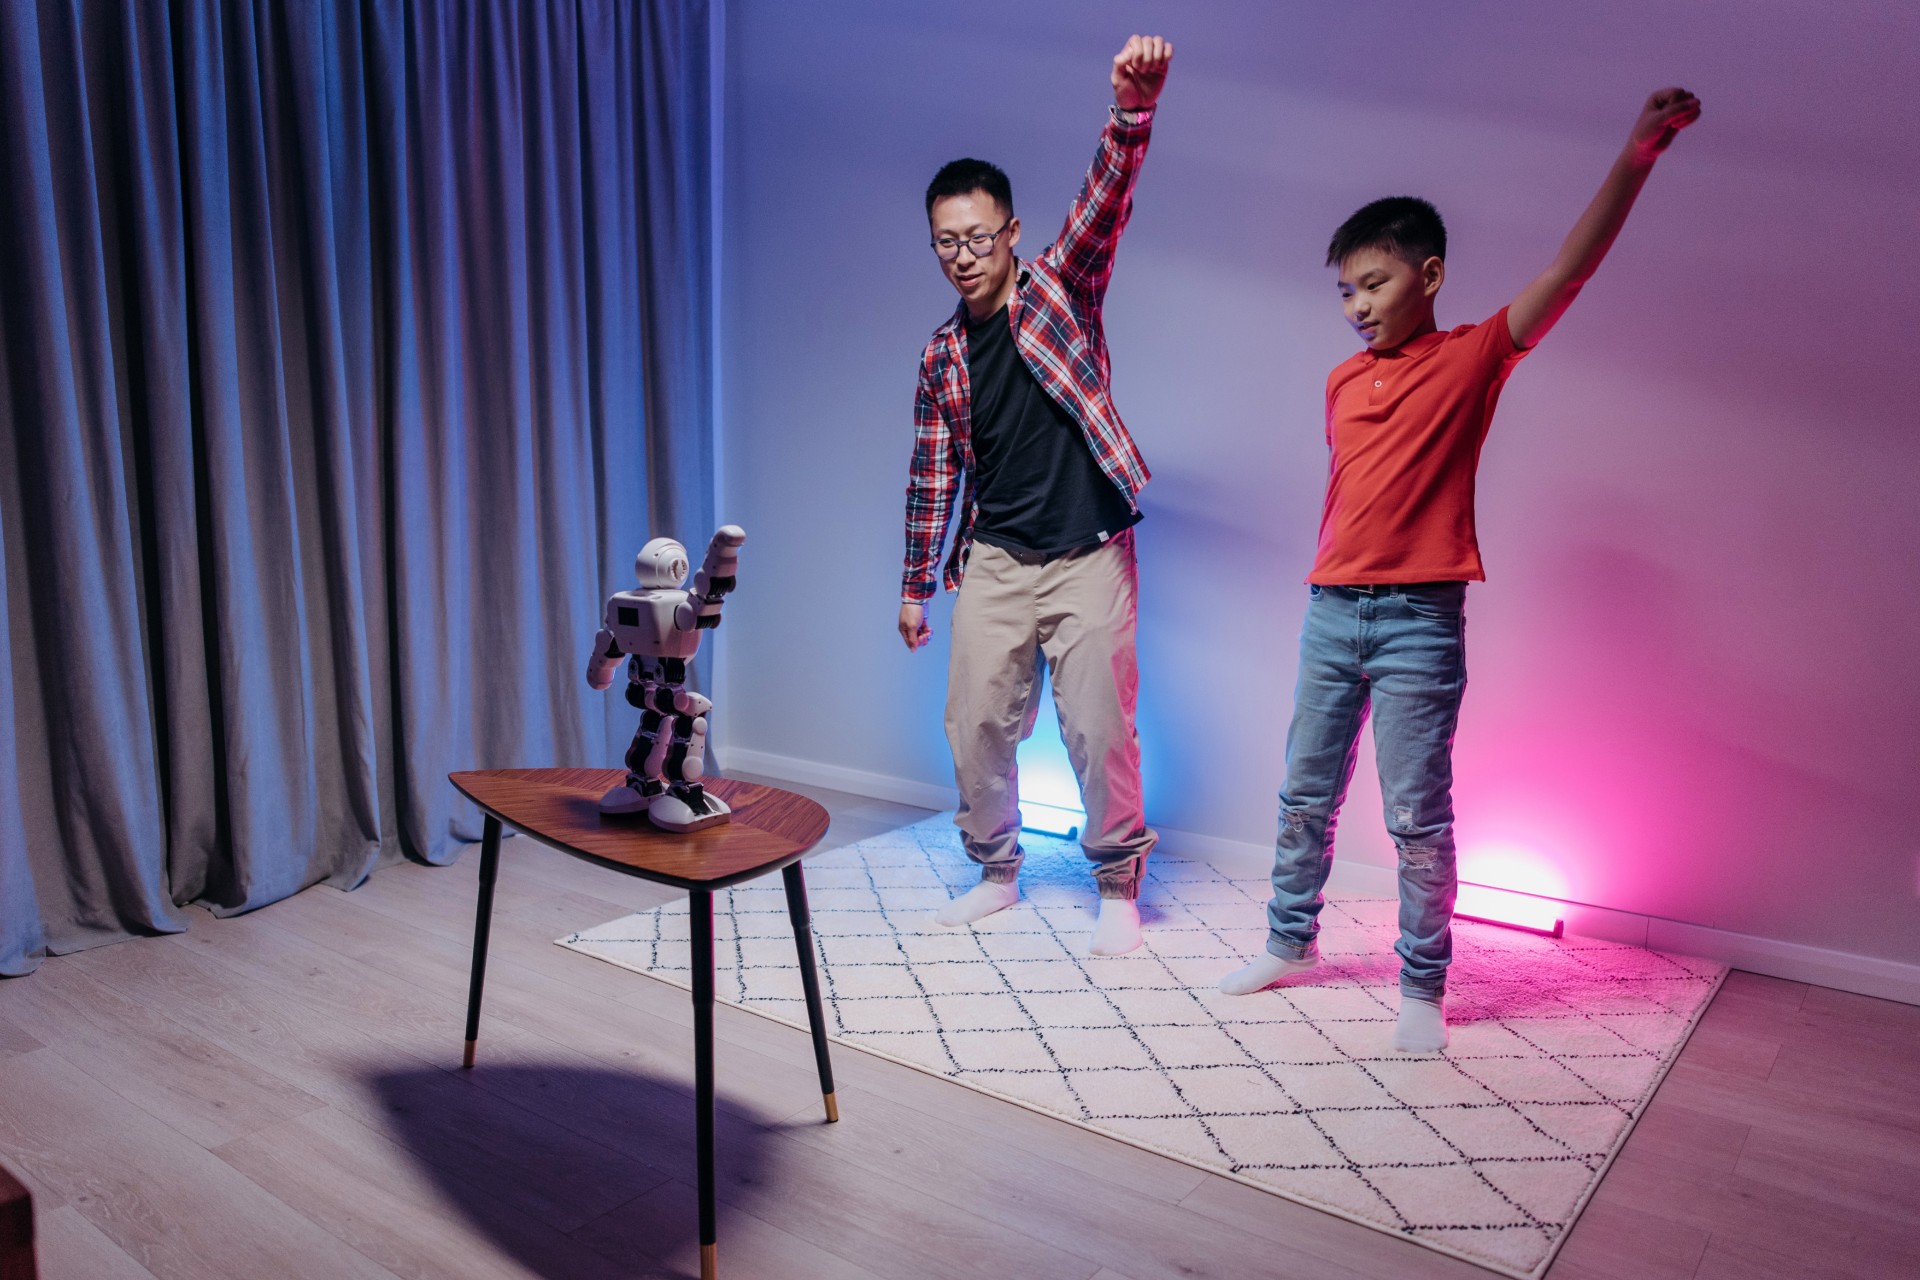 Dancing robots mimic human-like choreographic dancing and move in replication of the manually programmed, often-complicated actions.